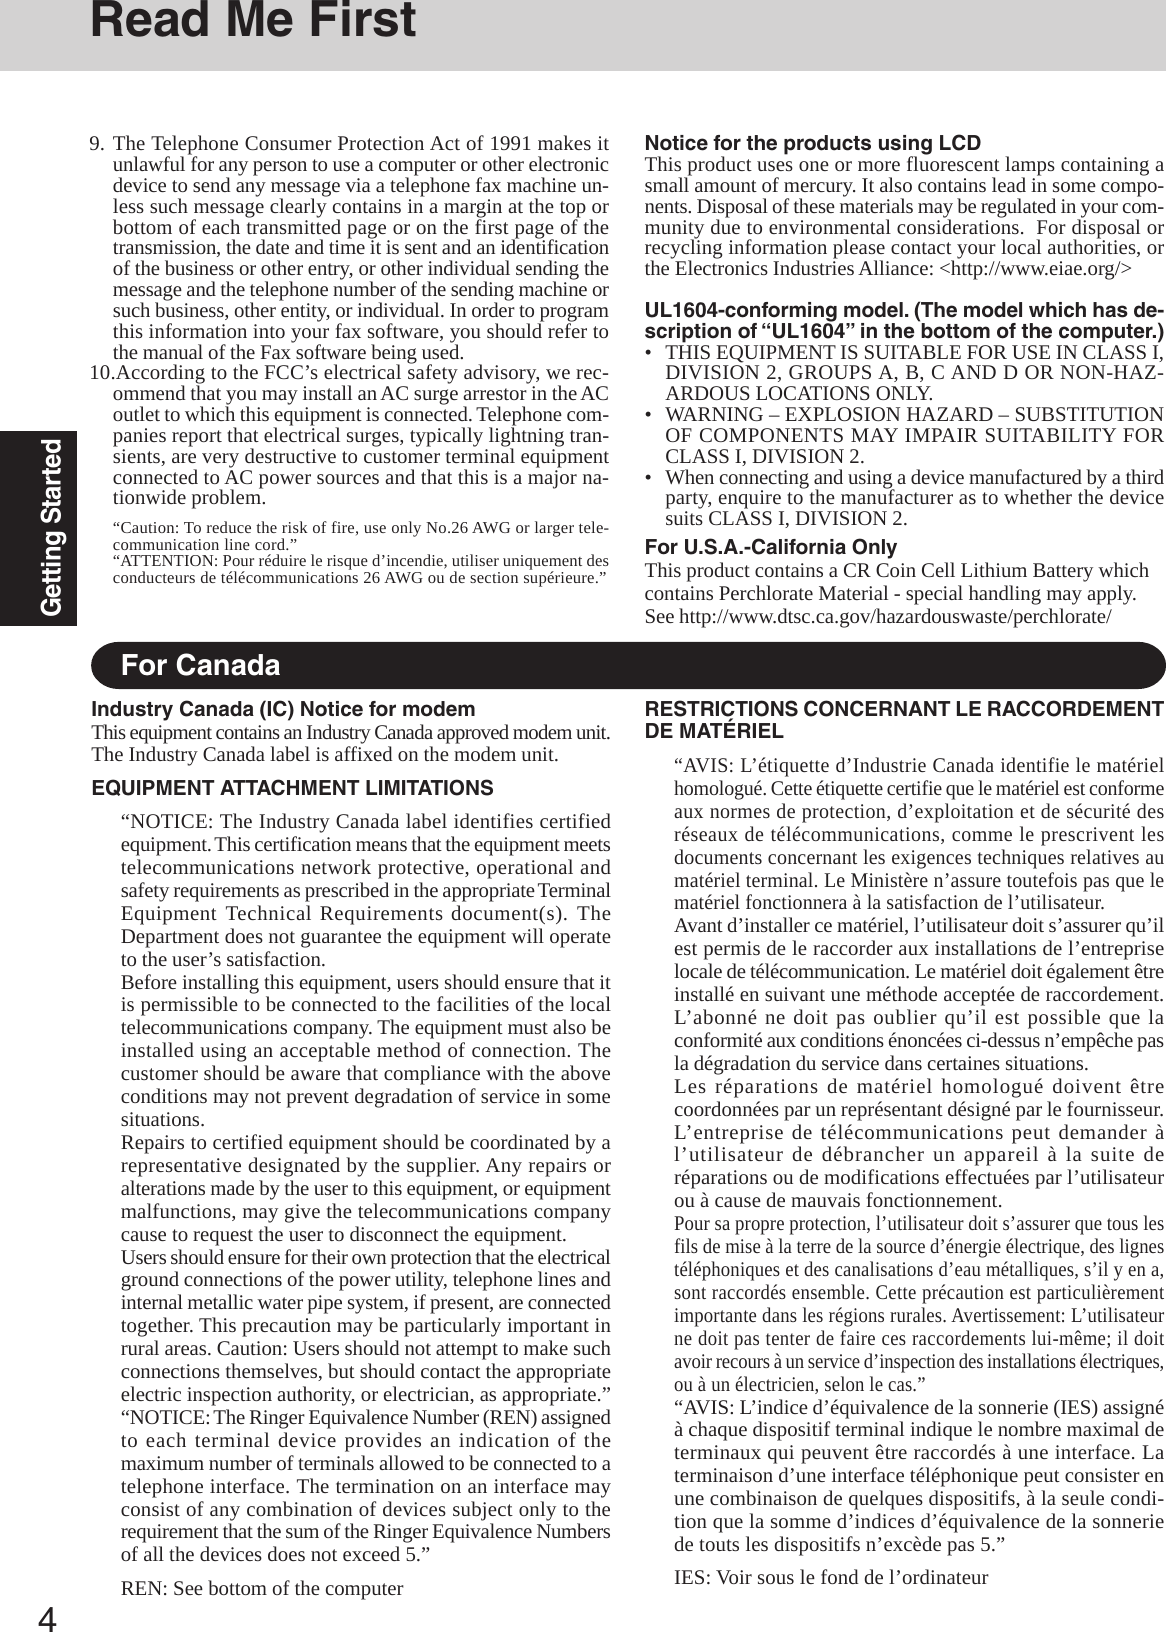 4Getting StartedRead Me FirstFor CanadaIndustry Canada (IC) Notice for modemThis equipment contains an Industry Canada approved modem unit.The Industry Canada label is affixed on the modem unit.EQUIPMENT ATTACHMENT LIMITATIONS“NOTICE: The Industry Canada label identifies certifiedequipment. This certification means that the equipment meetstelecommunications network protective, operational andsafety requirements as prescribed in the appropriate TerminalEquipment Technical Requirements document(s). TheDepartment does not guarantee the equipment will operateto the user’s satisfaction.Before installing this equipment, users should ensure that itis permissible to be connected to the facilities of the localtelecommunications company. The equipment must also beinstalled using an acceptable method of connection. Thecustomer should be aware that compliance with the aboveconditions may not prevent degradation of service in somesituations.Repairs to certified equipment should be coordinated by arepresentative designated by the supplier. Any repairs oralterations made by the user to this equipment, or equipmentmalfunctions, may give the telecommunications companycause to request the user to disconnect the equipment.Users should ensure for their own protection that the electricalground connections of the power utility, telephone lines andinternal metallic water pipe system, if present, are connectedtogether. This precaution may be particularly important inrural areas. Caution: Users should not attempt to make suchconnections themselves, but should contact the appropriateelectric inspection authority, or electrician, as appropriate.”“NOTICE: The Ringer Equivalence Number (REN) assignedto each terminal device provides an indication of themaximum number of terminals allowed to be connected to atelephone interface. The termination on an interface mayconsist of any combination of devices subject only to therequirement that the sum of the Ringer Equivalence Numbersof all the devices does not exceed 5.”REN: See bottom of the computerRESTRICTIONS CONCERNANT LE RACCORDEMENTDE MATÉRIEL“AVIS: L’étiquette d’Industrie Canada identifie le matérielhomologué. Cette étiquette certifie que le matériel est conformeaux normes de protection, d’exploitation et de sécurité desréseaux de télécommunications, comme le prescrivent lesdocuments concernant les exigences techniques relatives aumatériel terminal. Le Ministère n’assure toutefois pas que lematériel fonctionnera à la satisfaction de l’utilisateur.Avant d’installer ce matériel, l’utilisateur doit s’assurer qu’ilest permis de le raccorder aux installations de l’entrepriselocale de télécommunication. Le matériel doit également êtreinstallé en suivant une méthode acceptée de raccordement.L’abonné ne doit pas oublier qu’il est possible que laconformité aux conditions énoncées ci-dessus n’empêche pasla dégradation du service dans certaines situations.Les réparations de matériel homologué doivent êtrecoordonnées par un représentant désigné par le fournisseur.L’entreprise de télécommunications peut demander àl’utilisateur de débrancher un appareil à la suite deréparations ou de modifications effectuées par l’utilisateurou à cause de mauvais fonctionnement.Pour sa propre protection, l’utilisateur doit s’assurer que tous lesfils de mise à la terre de la source d’énergie électrique, des lignestéléphoniques et des canalisations d’eau métalliques, s’il y en a,sont raccordés ensemble. Cette précaution est particulièrementimportante dans les régions rurales. Avertissement: L’utilisateurne doit pas tenter de faire ces raccordements lui-même; il doitavoir recours à un service d’inspection des installations électriques,ou à un électricien, selon le cas.”“AVIS: L’indice d’équivalence de la sonnerie (IES) assignéà chaque dispositif terminal indique le nombre maximal determinaux qui peuvent être raccordés à une interface. Laterminaison d’une interface téléphonique peut consister enune combinaison de quelques dispositifs, à la seule condi-tion que la somme d’indices d’équivalence de la sonneriede touts les dispositifs n’excède pas 5.”IES: Voir sous le fond de l’ordinateurNotice for the products using LCDThis product uses one or more fluorescent lamps containing asmall amount of mercury. It also contains lead in some compo-nents. Disposal of these materials may be regulated in your com-munity due to environmental considerations.  For disposal orrecycling information please contact your local authorities, orthe Electronics Industries Alliance: &lt;http://www.eiae.org/&gt;UL1604-conforming model. (The model which has de-scription of “UL1604” in the bottom of the computer.)• THIS EQUIPMENT IS SUITABLE FOR USE IN CLASS I,DIVISION 2, GROUPS A, B, C AND D OR NON-HAZ-ARDOUS LOCATIONS ONLY.• WARNING – EXPLOSION HAZARD – SUBSTITUTIONOF COMPONENTS MAY IMPAIR SUITABILITY FORCLASS I, DIVISION 2.• When connecting and using a device manufactured by a thirdparty, enquire to the manufacturer as to whether the devicesuits CLASS I, DIVISION 2.For U.S.A.-California OnlyThis product contains a CR Coin Cell Lithium Battery whichcontains Perchlorate Material - special handling may apply.See http://www.dtsc.ca.gov/hazardouswaste/perchlorate/9. The Telephone Consumer Protection Act of 1991 makes itunlawful for any person to use a computer or other electronicdevice to send any message via a telephone fax machine un-less such message clearly contains in a margin at the top orbottom of each transmitted page or on the first page of thetransmission, the date and time it is sent and an identificationof the business or other entry, or other individual sending themessage and the telephone number of the sending machine orsuch business, other entity, or individual. In order to programthis information into your fax software, you should refer tothe manual of the Fax software being used.10.According to the FCC’s electrical safety advisory, we rec-ommend that you may install an AC surge arrestor in the ACoutlet to which this equipment is connected. Telephone com-panies report that electrical surges, typically lightning tran-sients, are very destructive to customer terminal equipmentconnected to AC power sources and that this is a major na-tionwide problem.“Caution: To reduce the risk of fire, use only No.26 AWG or larger tele-communication line cord.”“ATTENTION: Pour réduire le risque d’incendie, utiliser uniquement desconducteurs de télécommunications 26 AWG ou de section supérieure.”